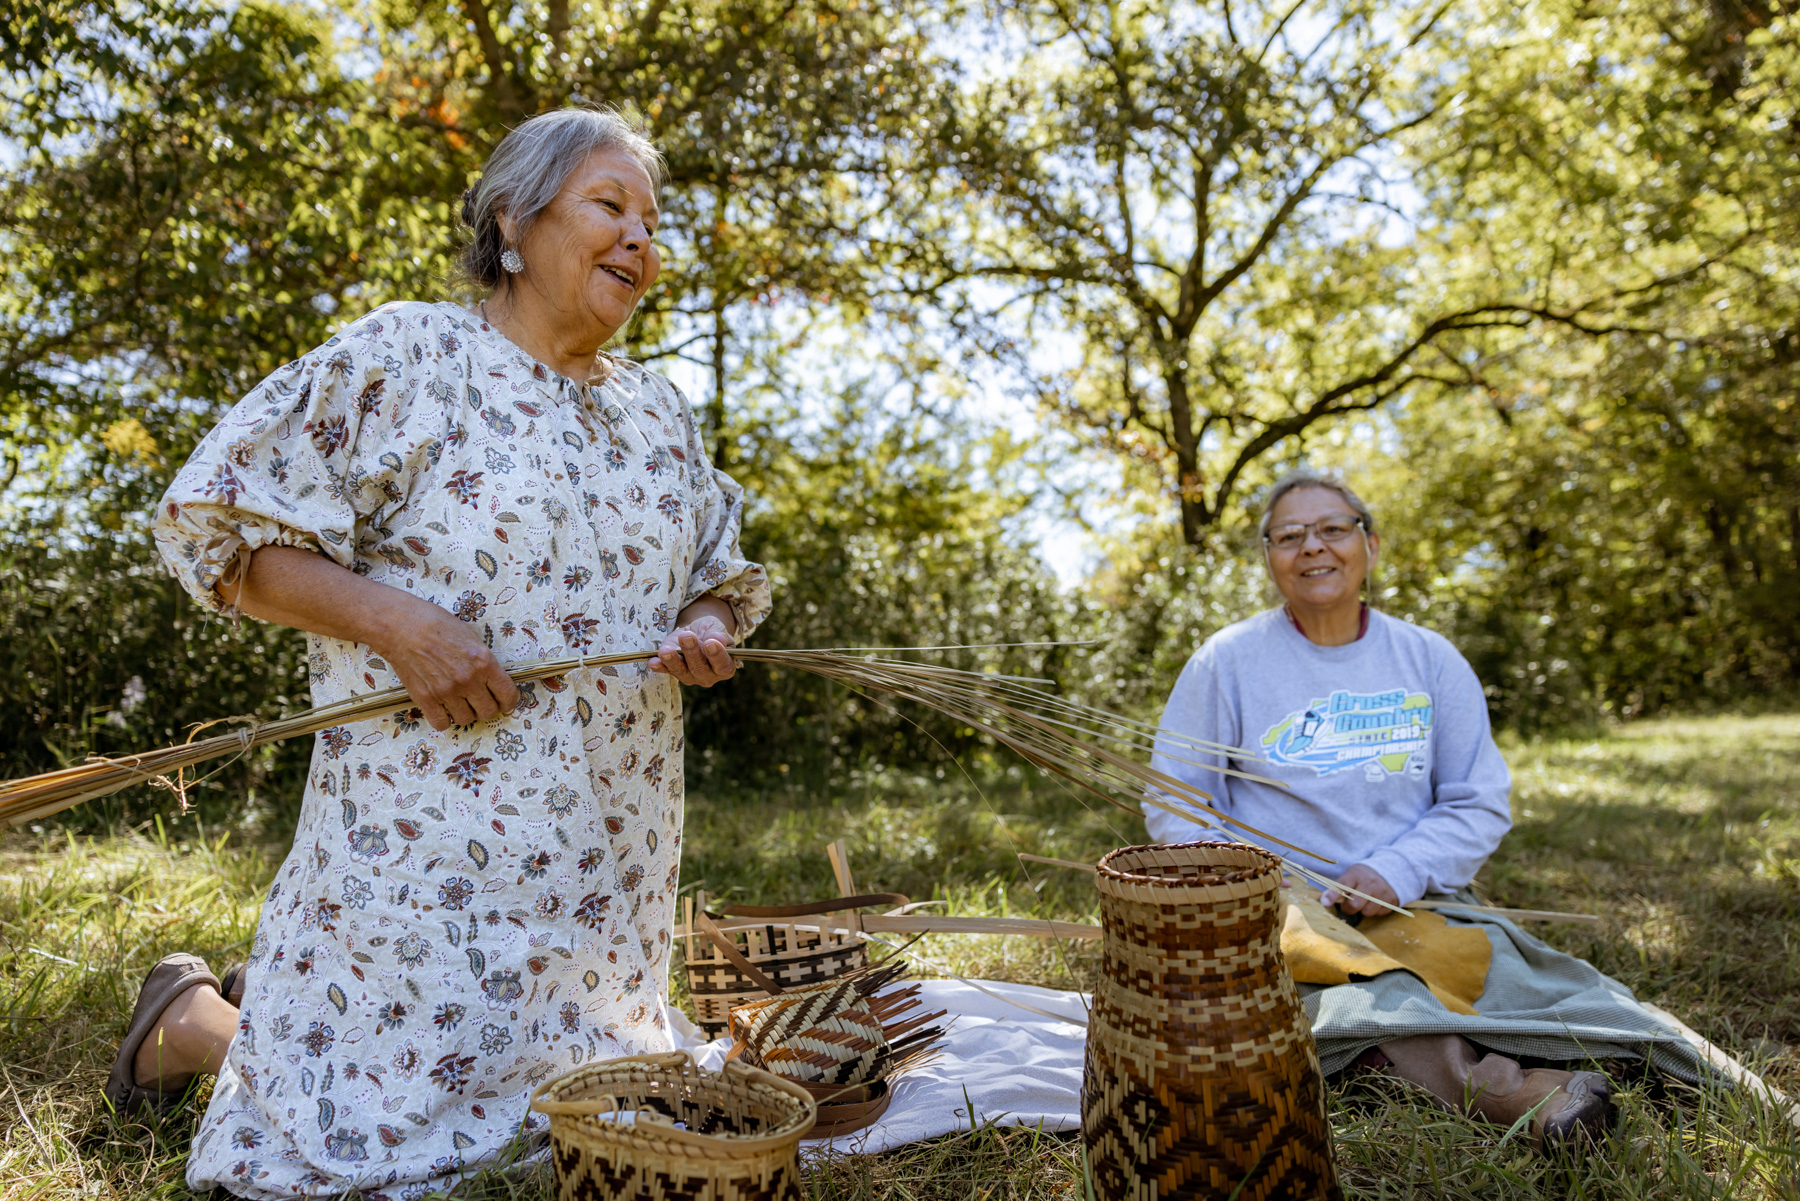 S-ga-du-gi (Community) is nv-wo-t(i) (medicine), basketmakers (Mary and Betty)  invest time, energy, and love into their craft. It’s a relationship with the land, the plant, and the people. Community and friendship lessen the burdens of making a basket.